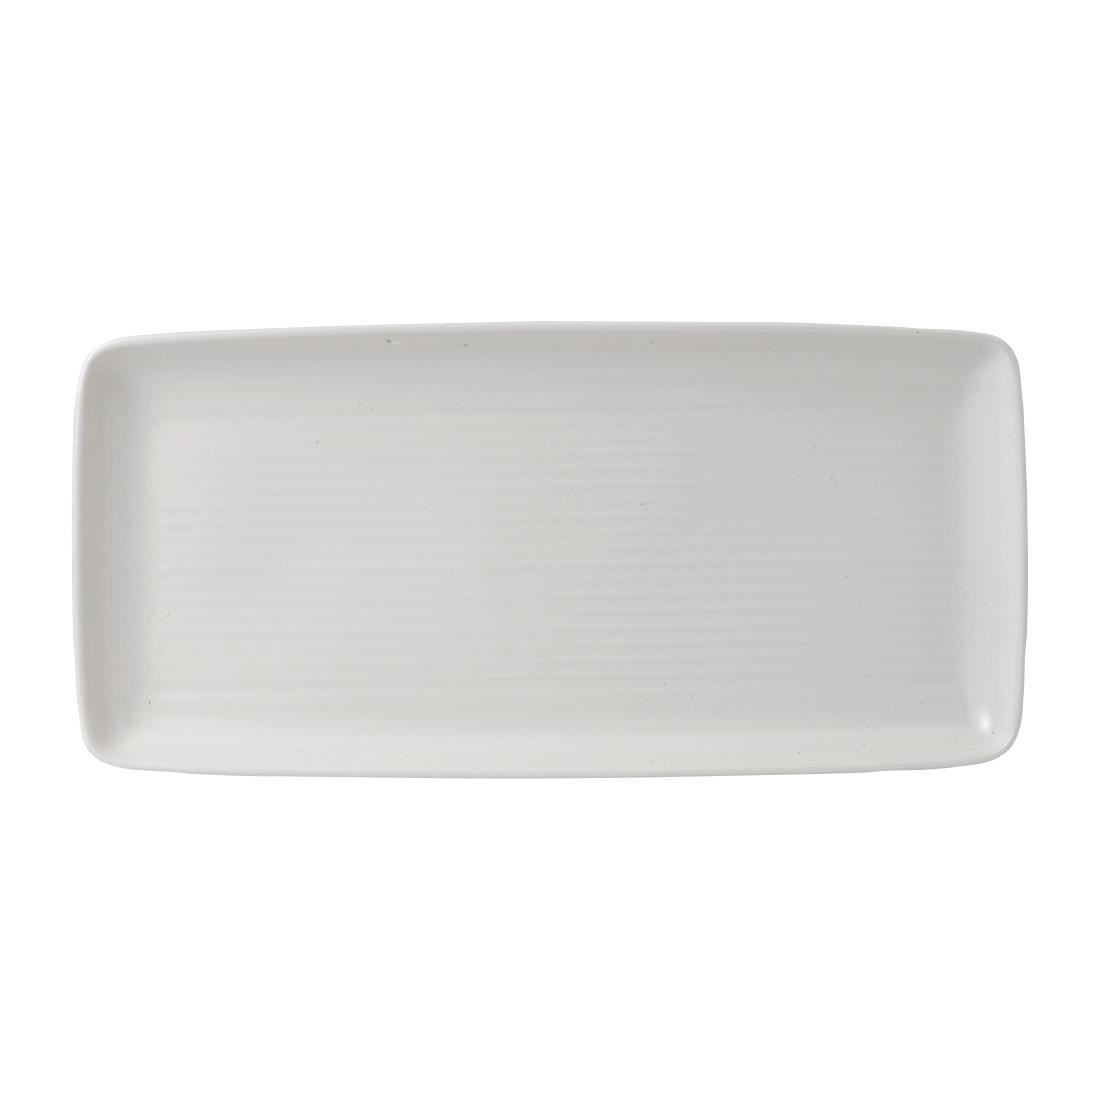 Dudson Evo Pearl Rectangular Tray 359 x 168mm (Pack of 4)